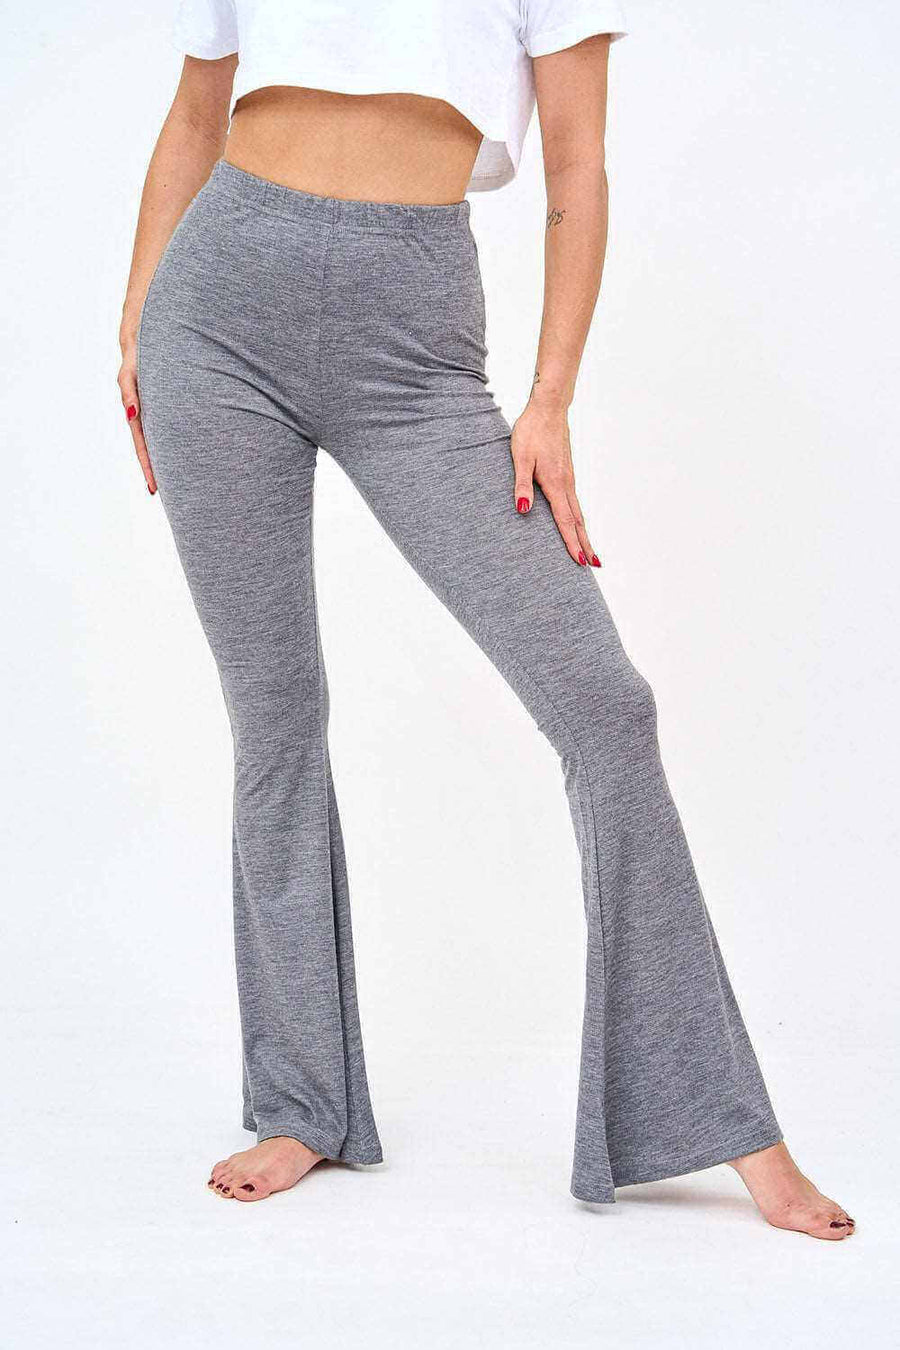 Close View of Womens Bell Bottom Leggings in Grey